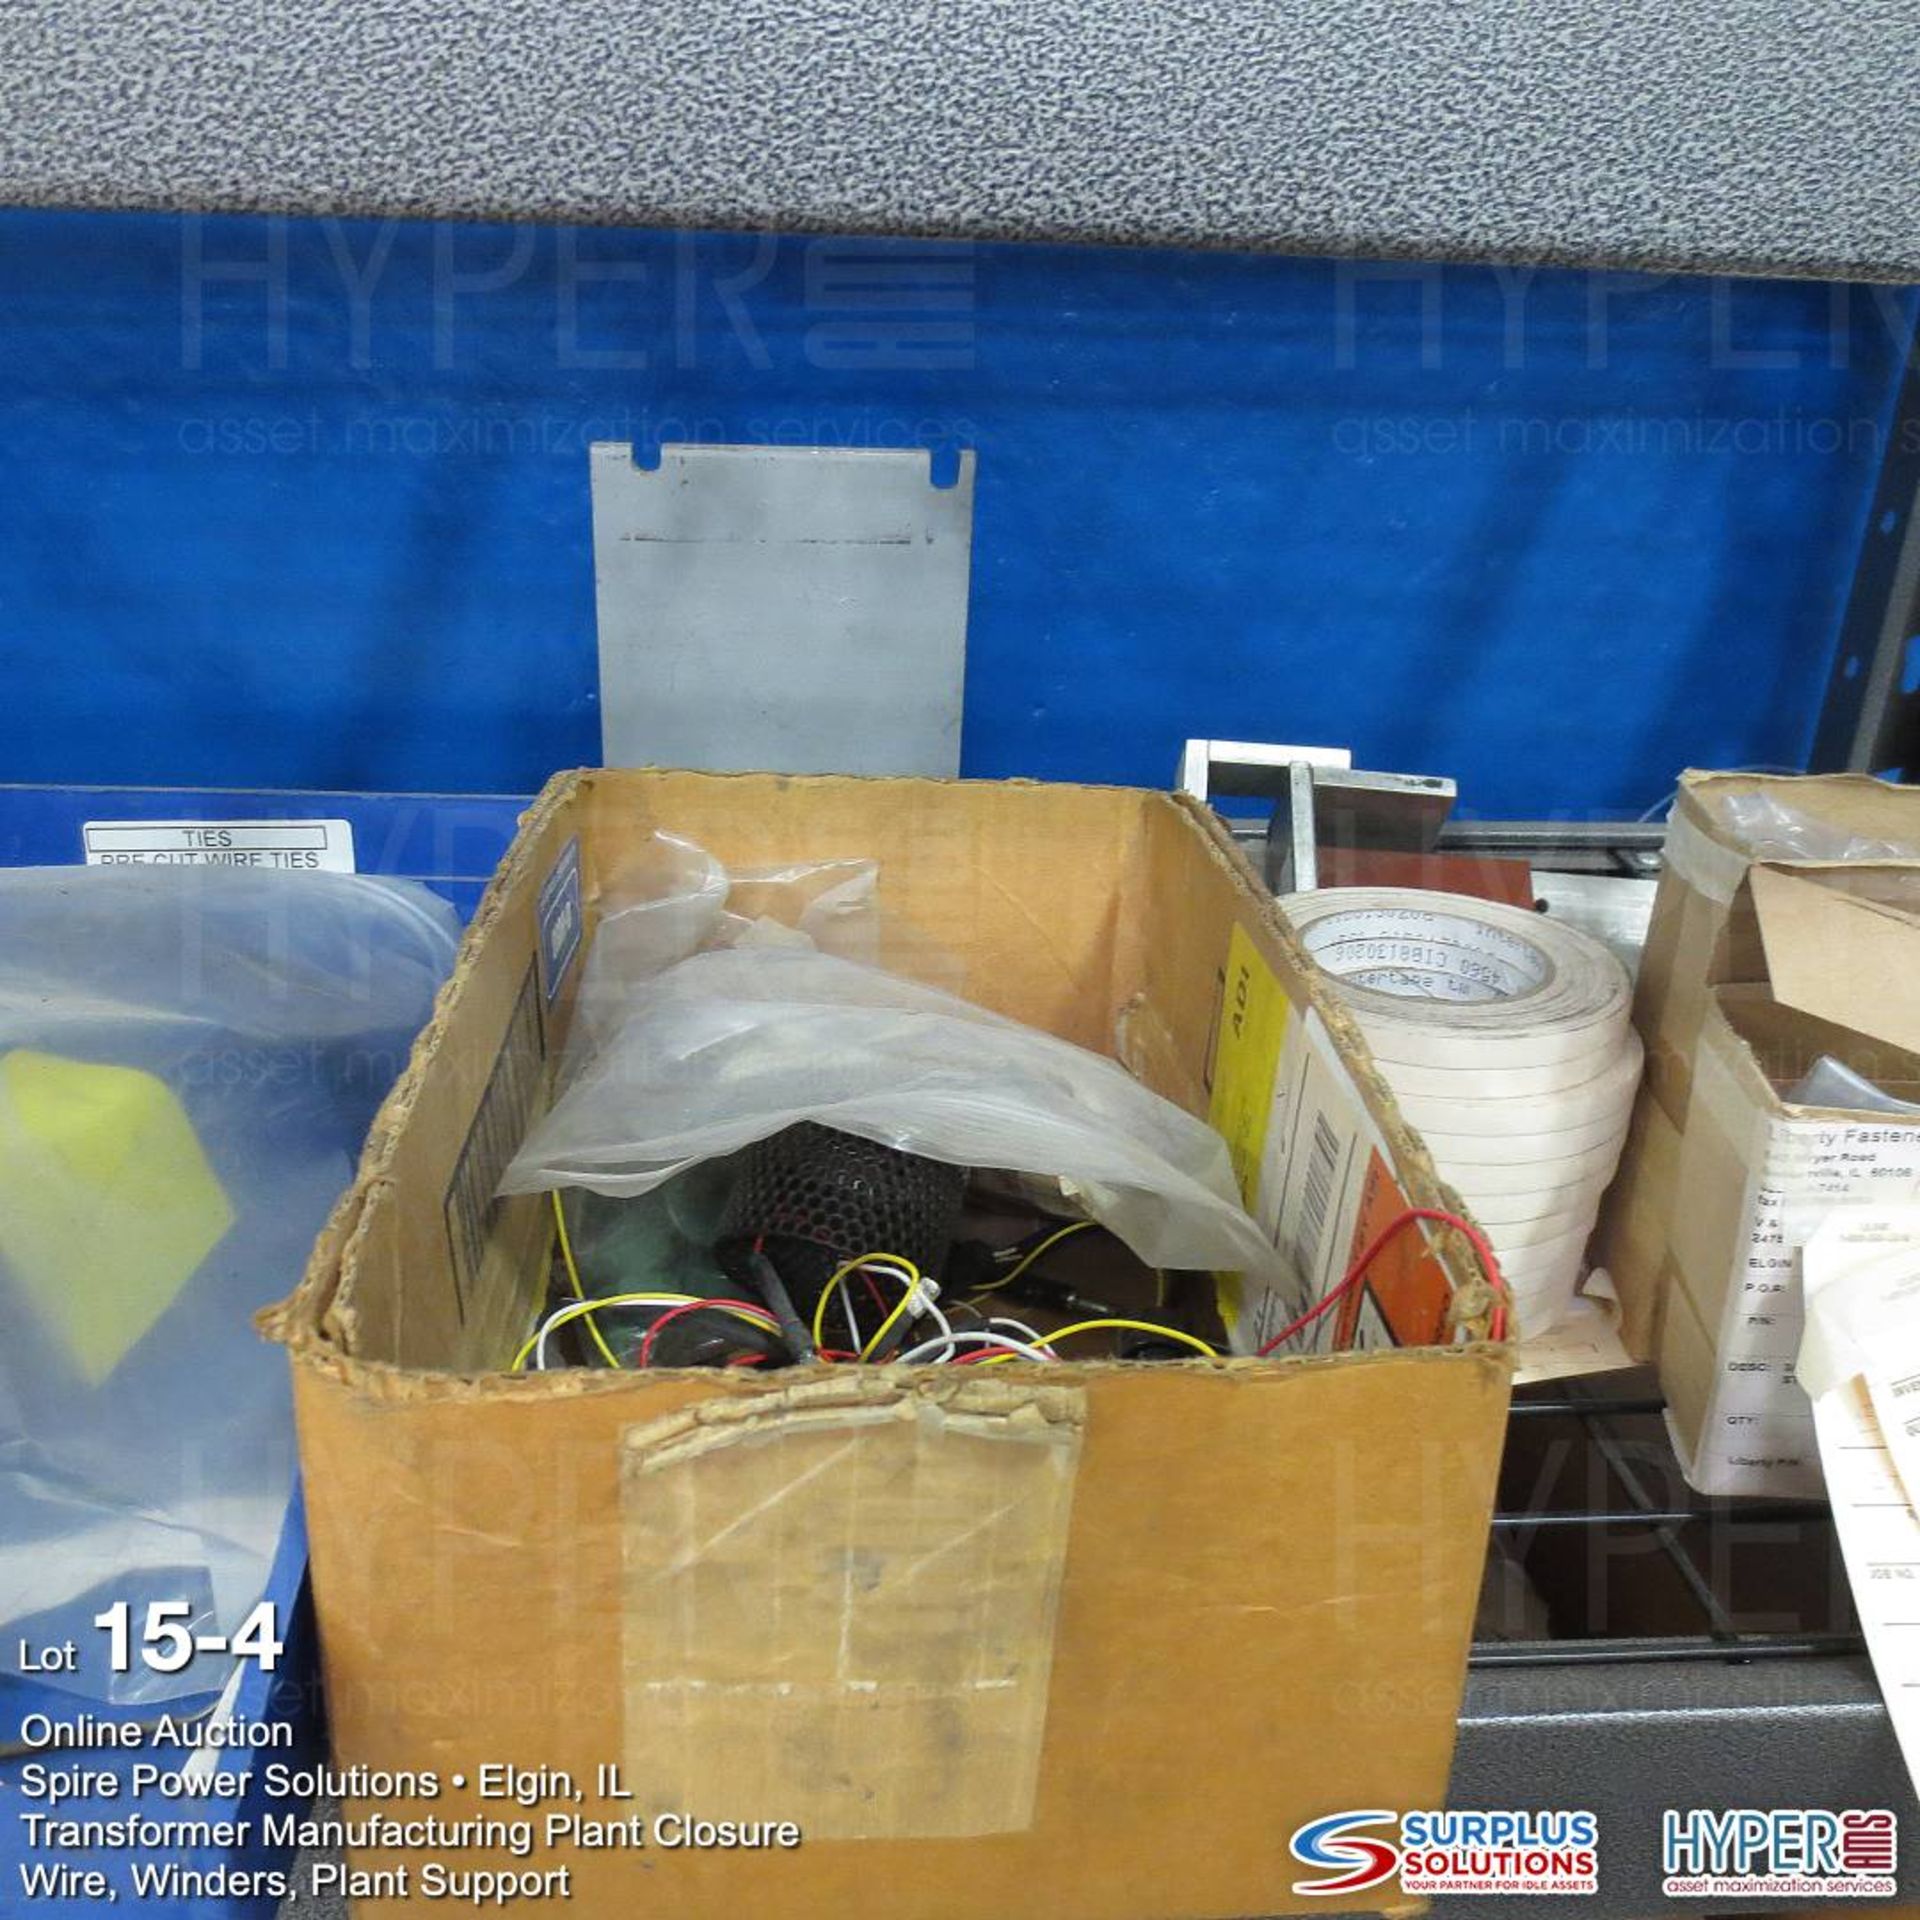 Aluminum tube, wire, tape and supplies ( no shelf ) - Image 4 of 8